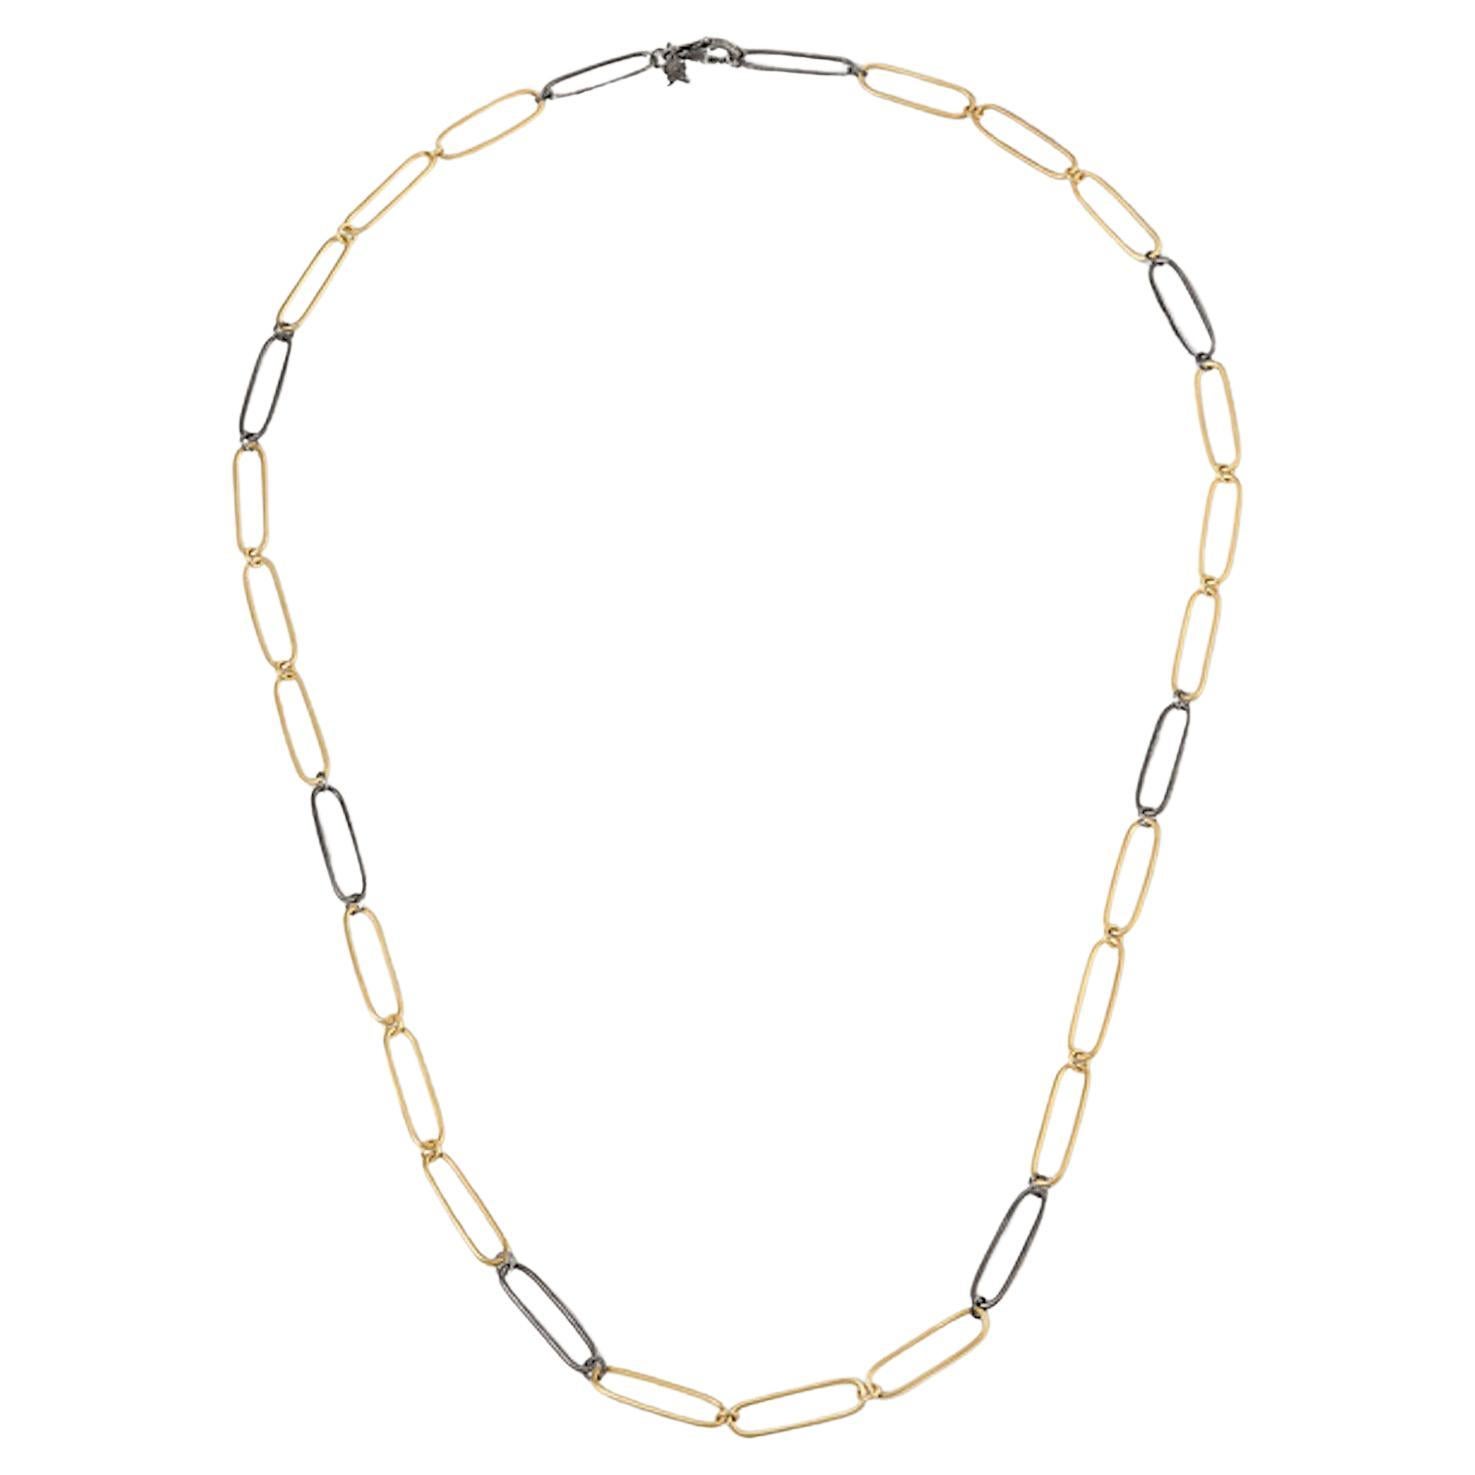 Two-Toned 24K Gold and Silver Long 25" Paperclip Link Chain Necklace by Kurtulan For Sale